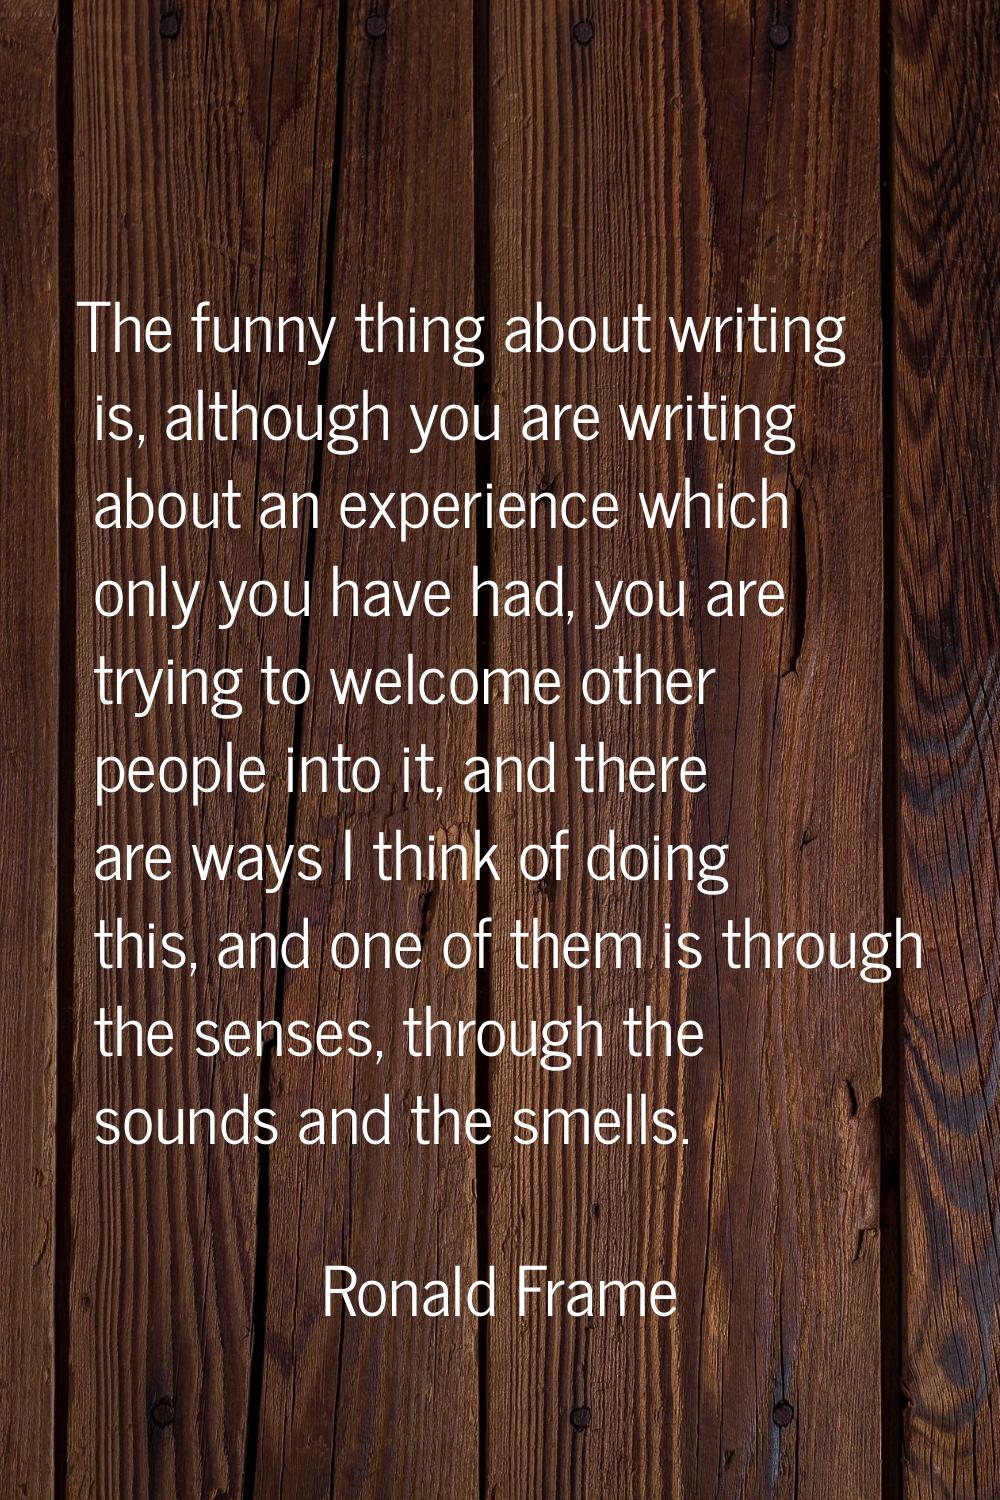 The funny thing about writing is, although you are writing about an experience which only you have 